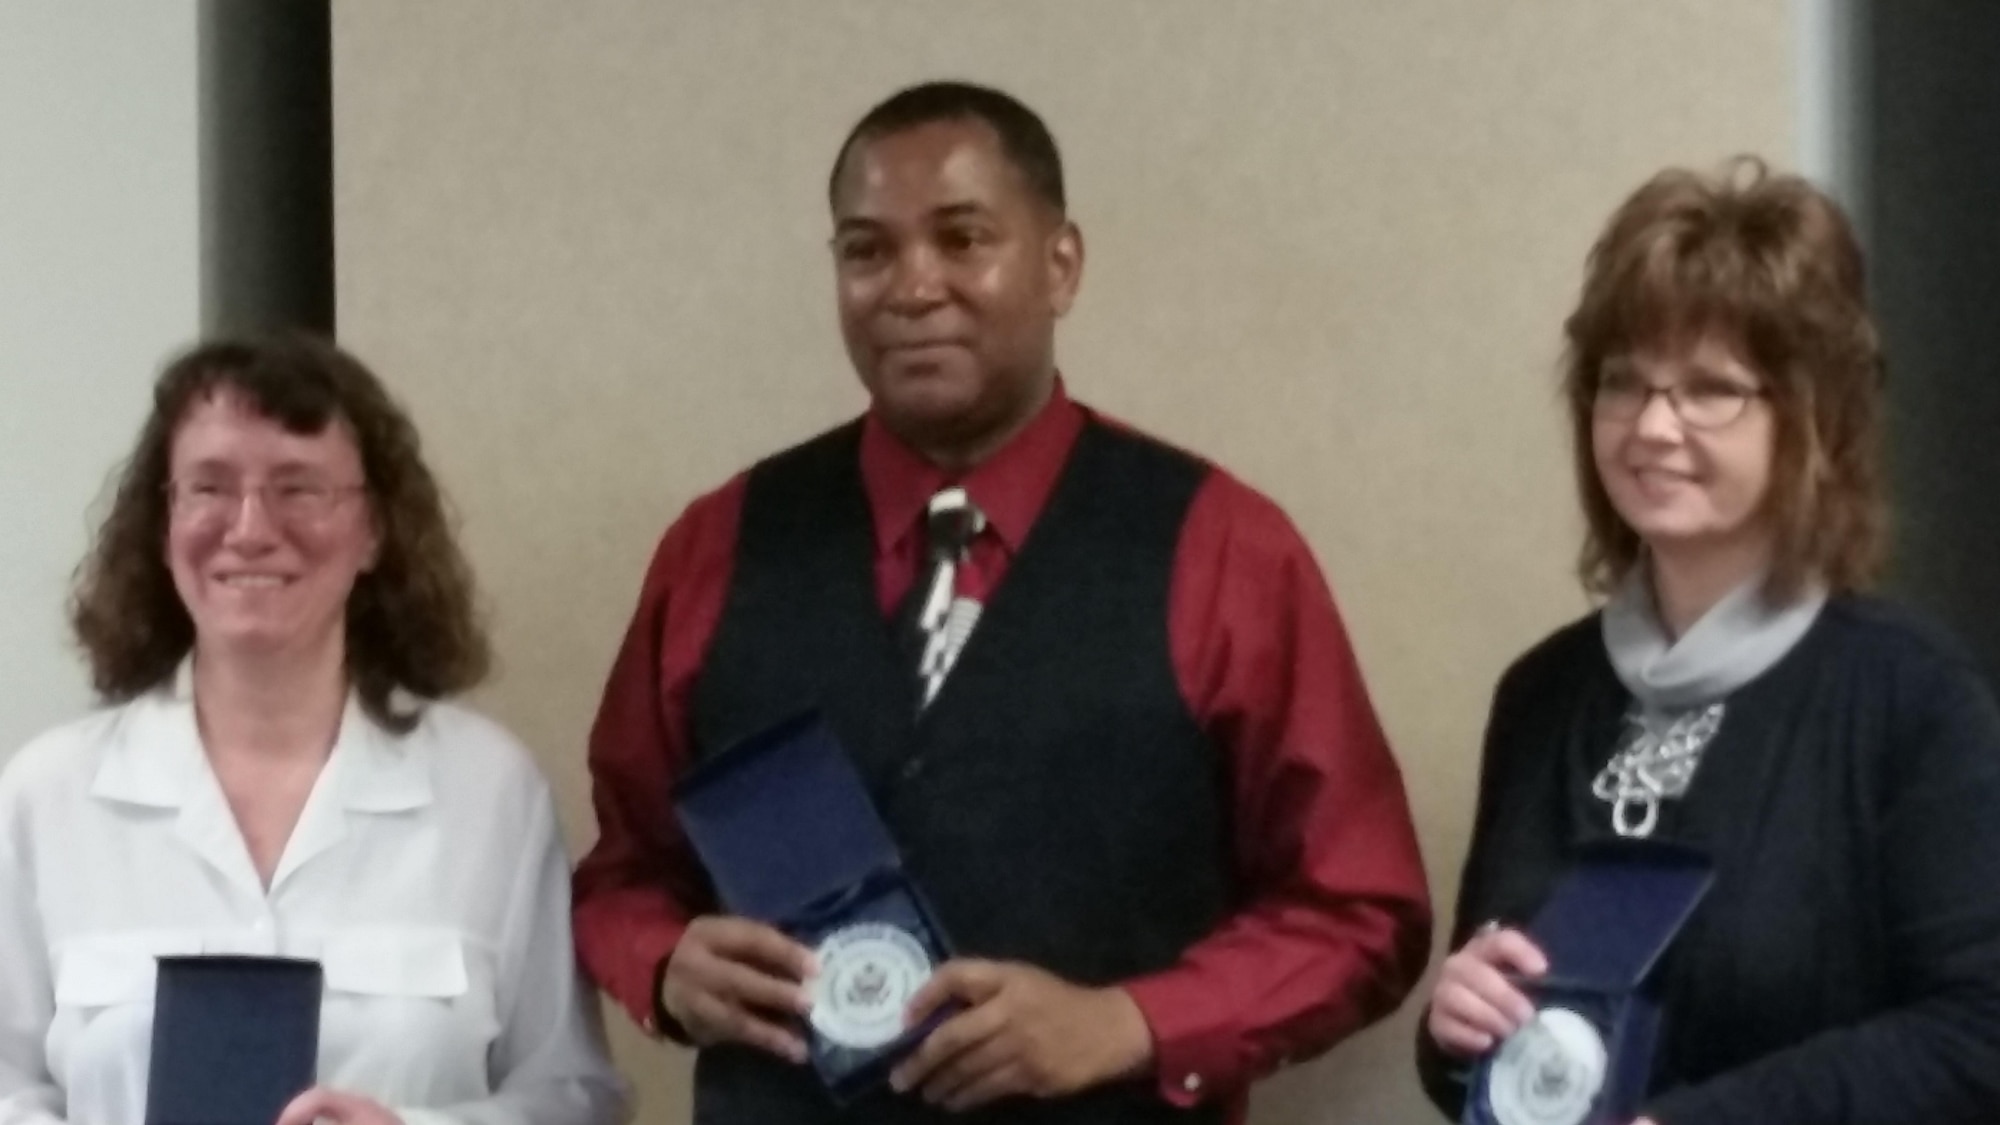 Ric Nunerley, Air Reserve Personnel Center administrative support specialist, received a Wonderful Outstanding Worker Award during the Colorado Federal Executive Board quarterly meeting and breakfast Jan. 28, 2016, in Denver. (U.S. Air Force photo/Mark Nelson)